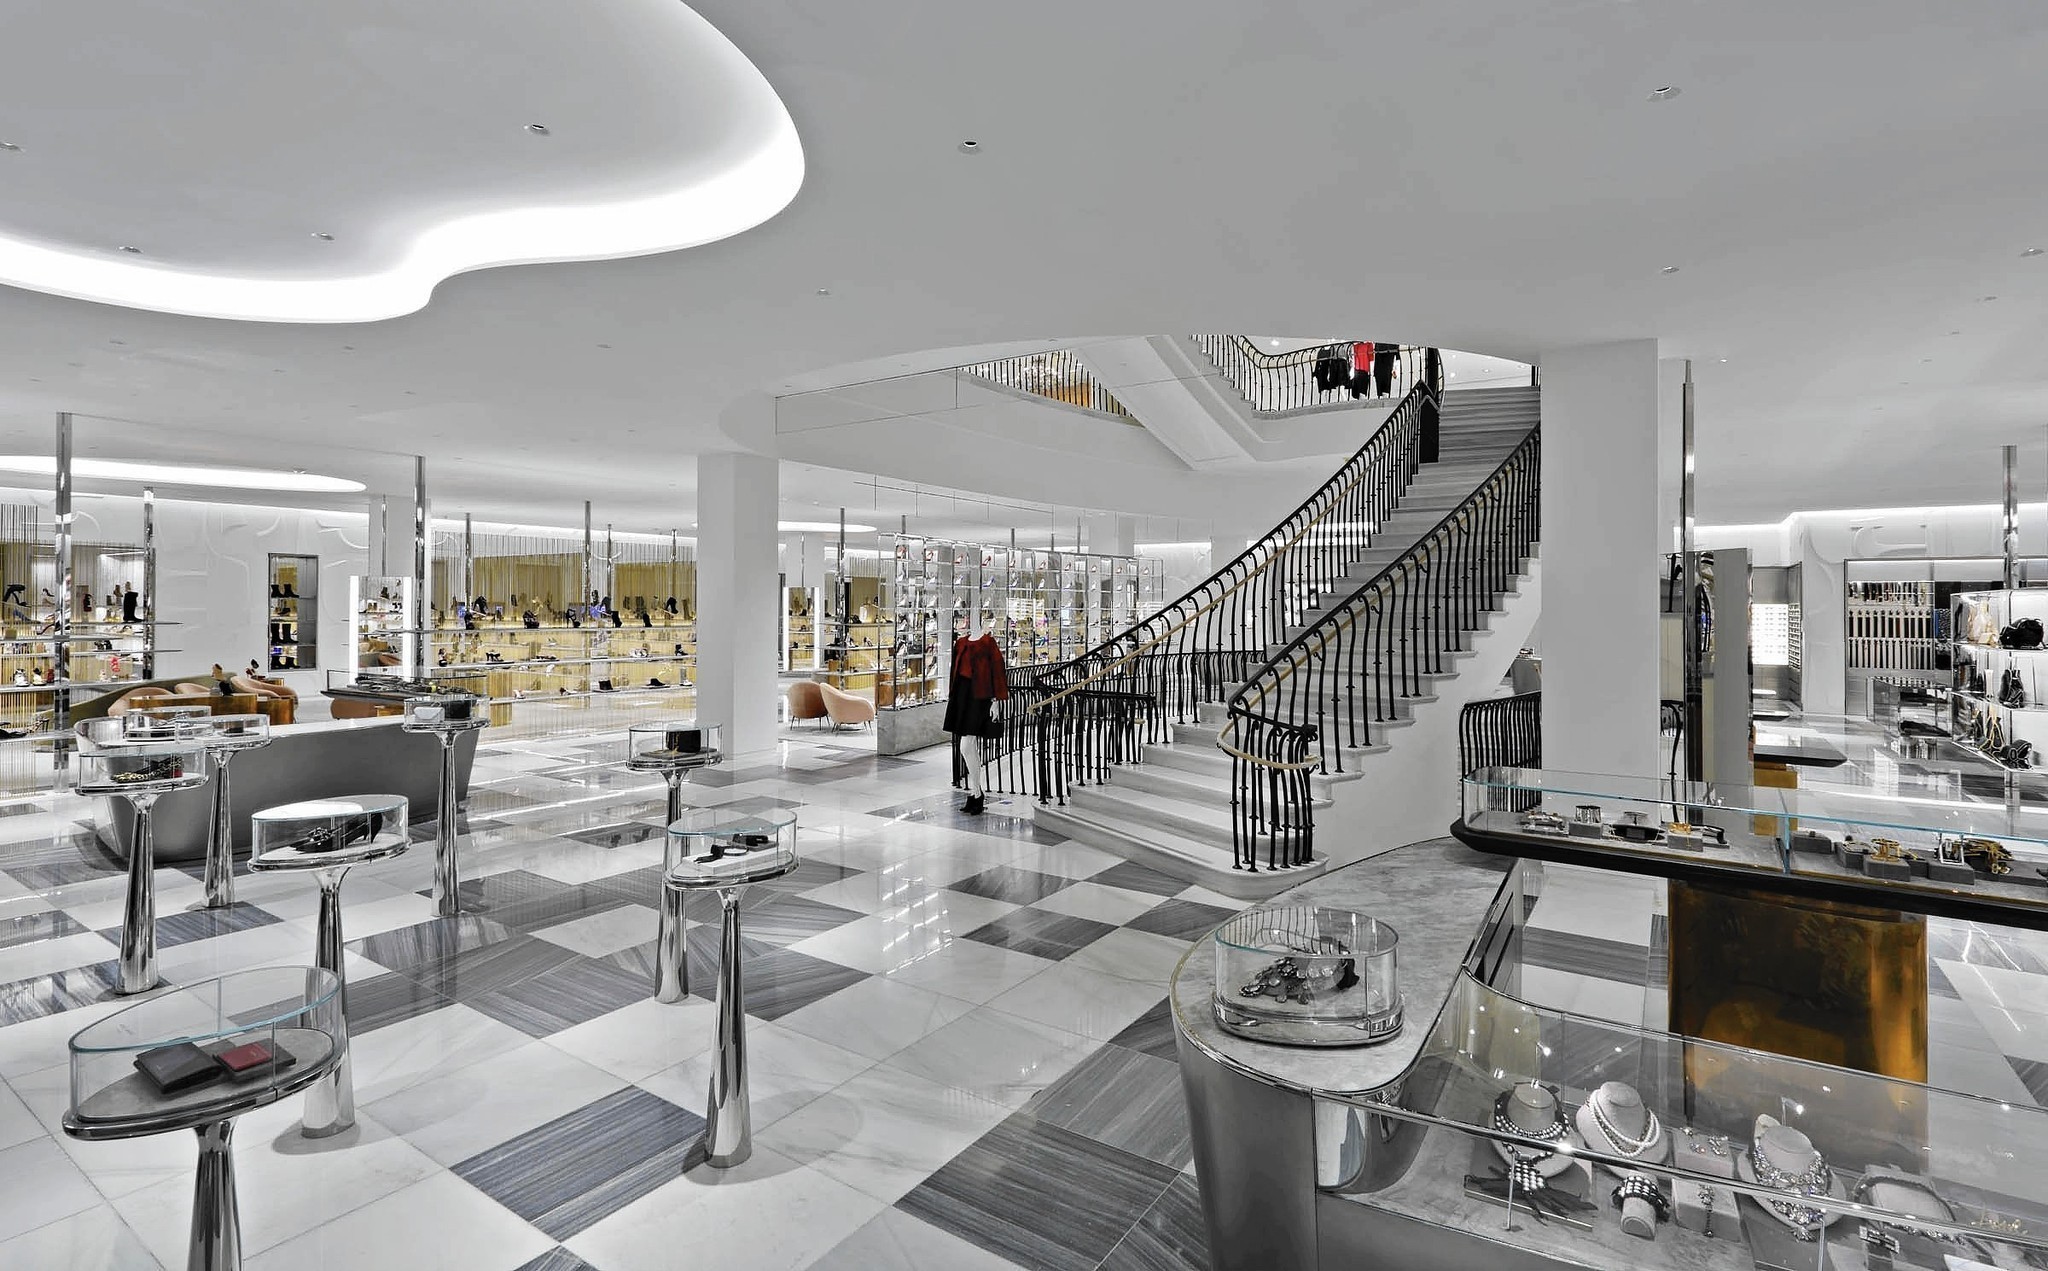 Barneys New York has L.A. Stories to tell after its redesign - LA Times